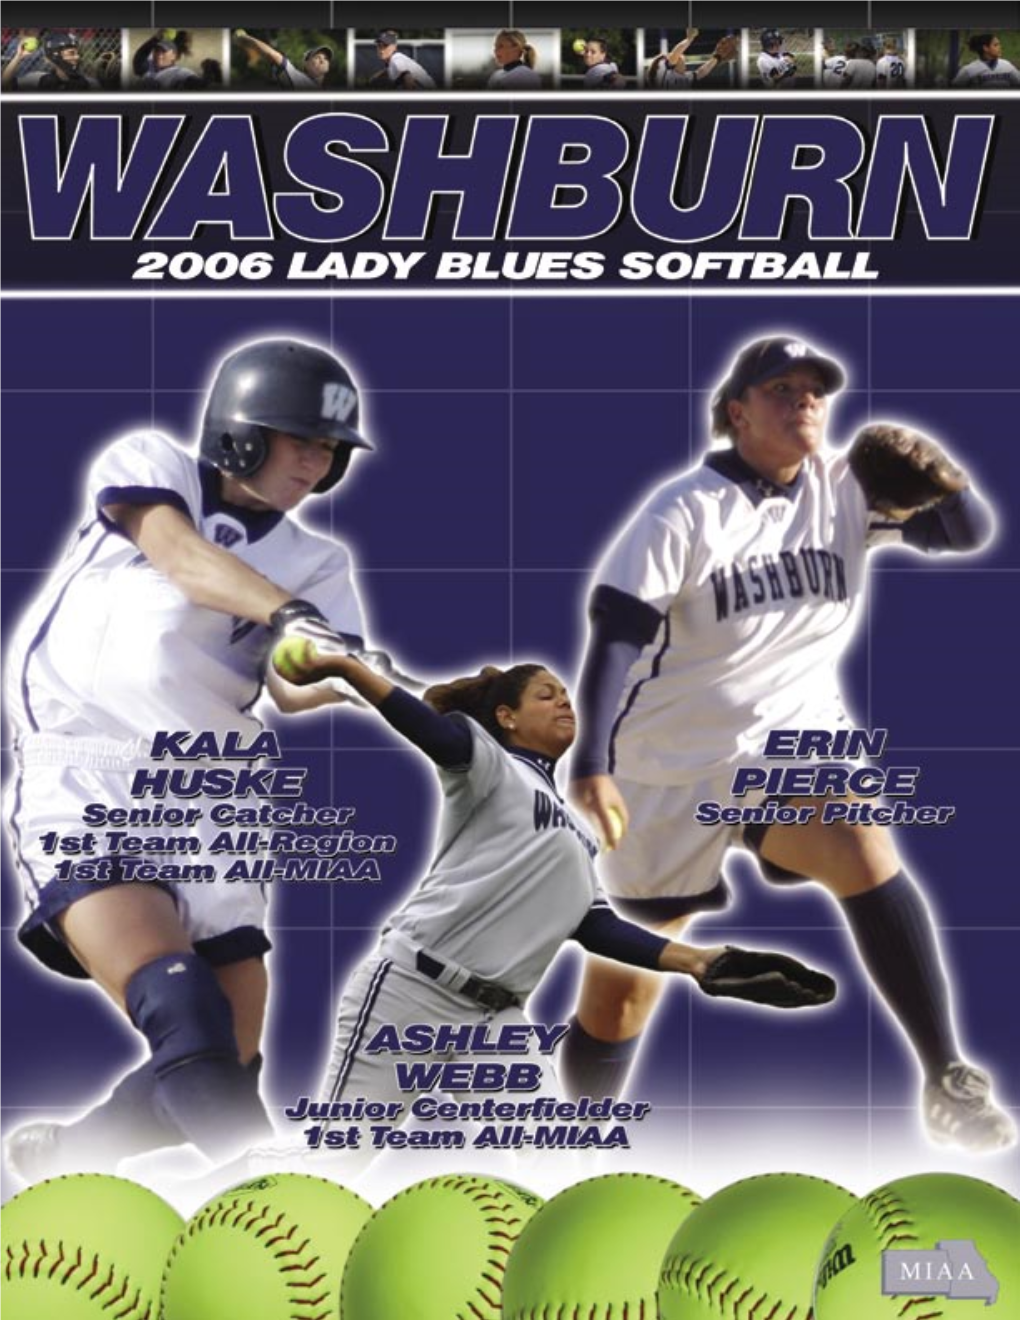 2006 Softball Guide Working.Indd